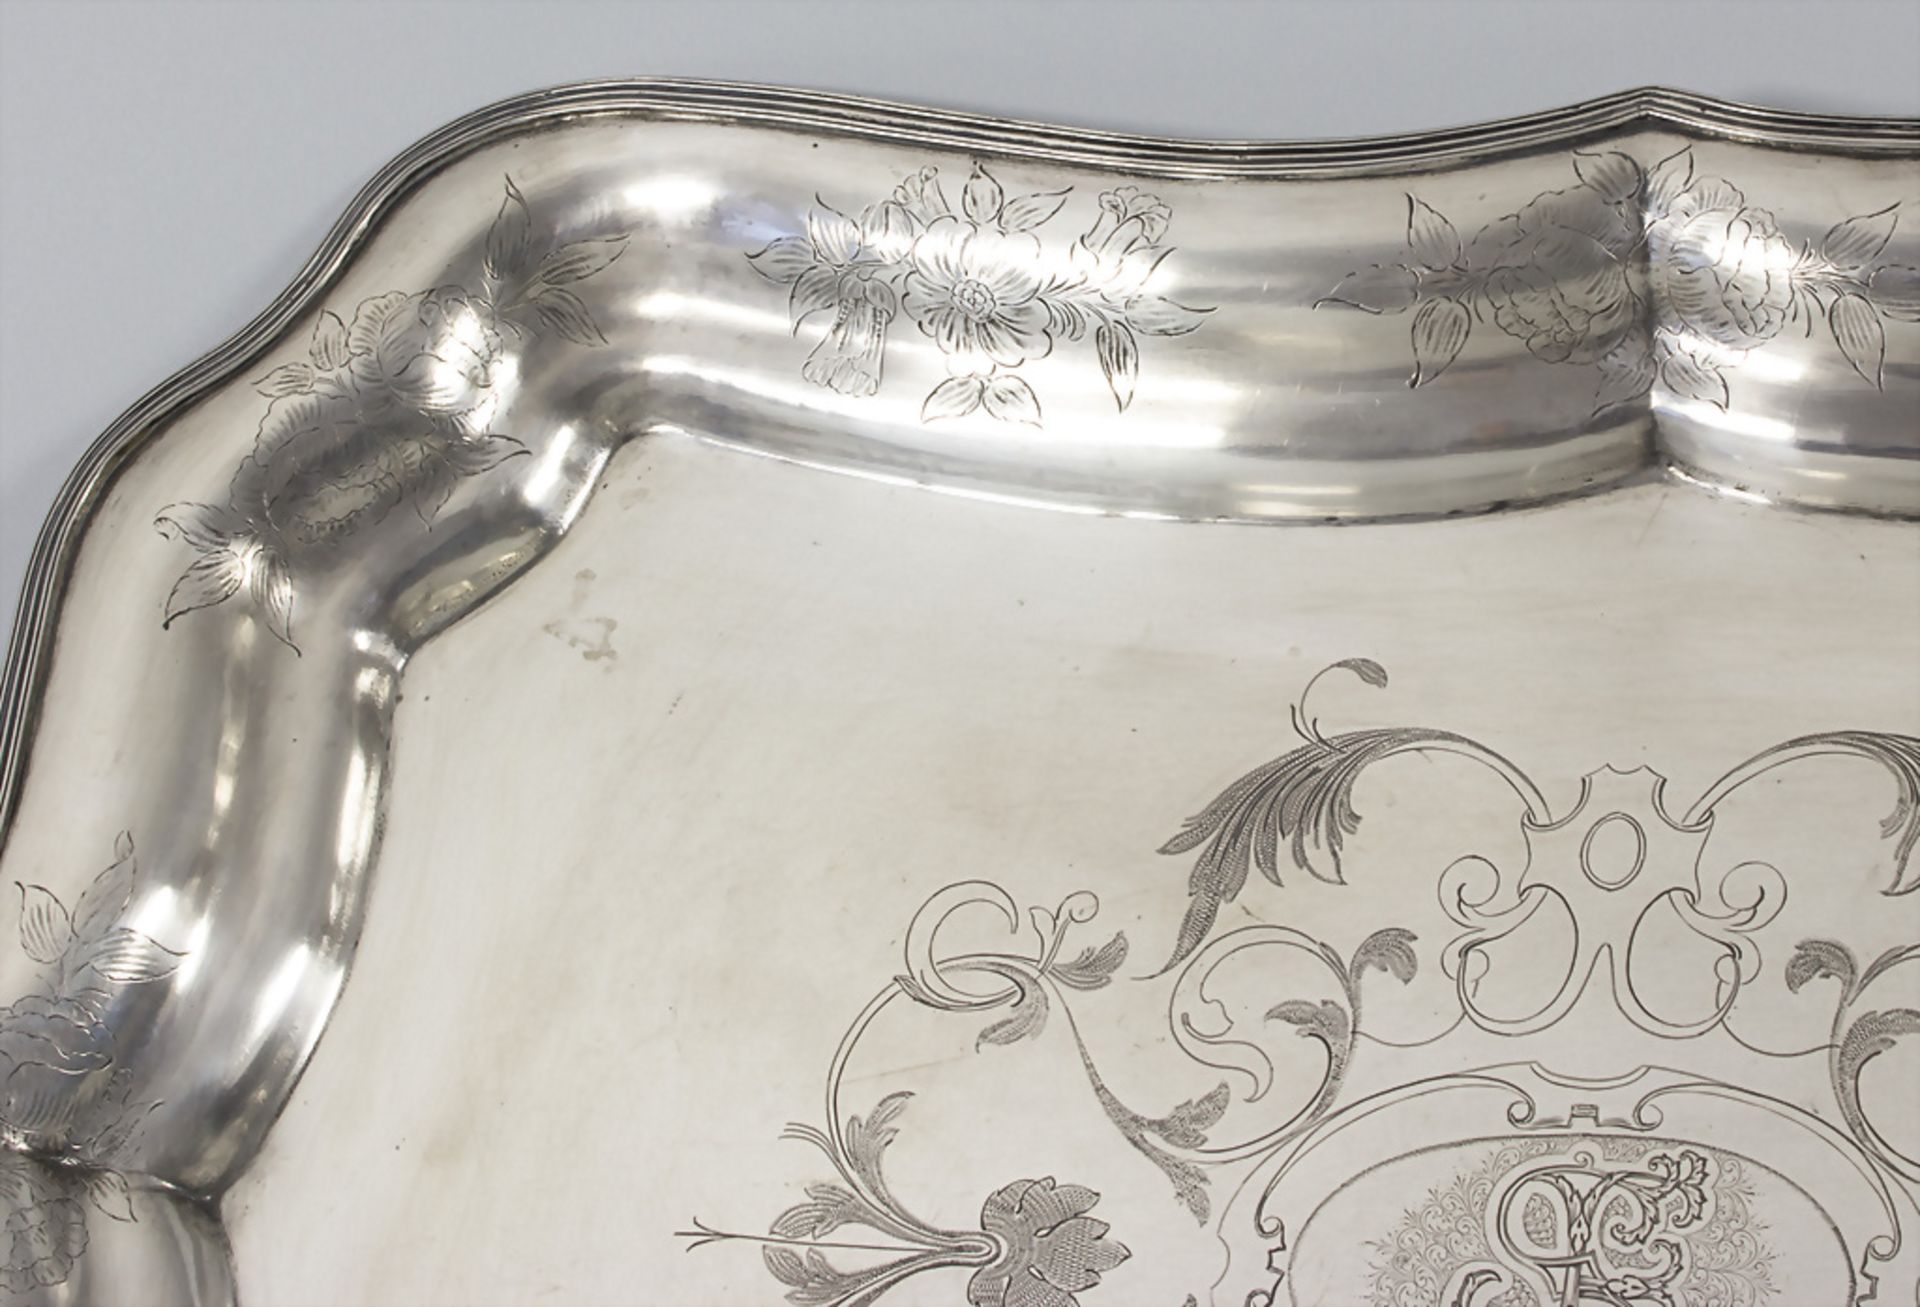 Großes Prunktablett / A large silver tray, Galtes, Barcelona, 19. Jh. - Image 3 of 9